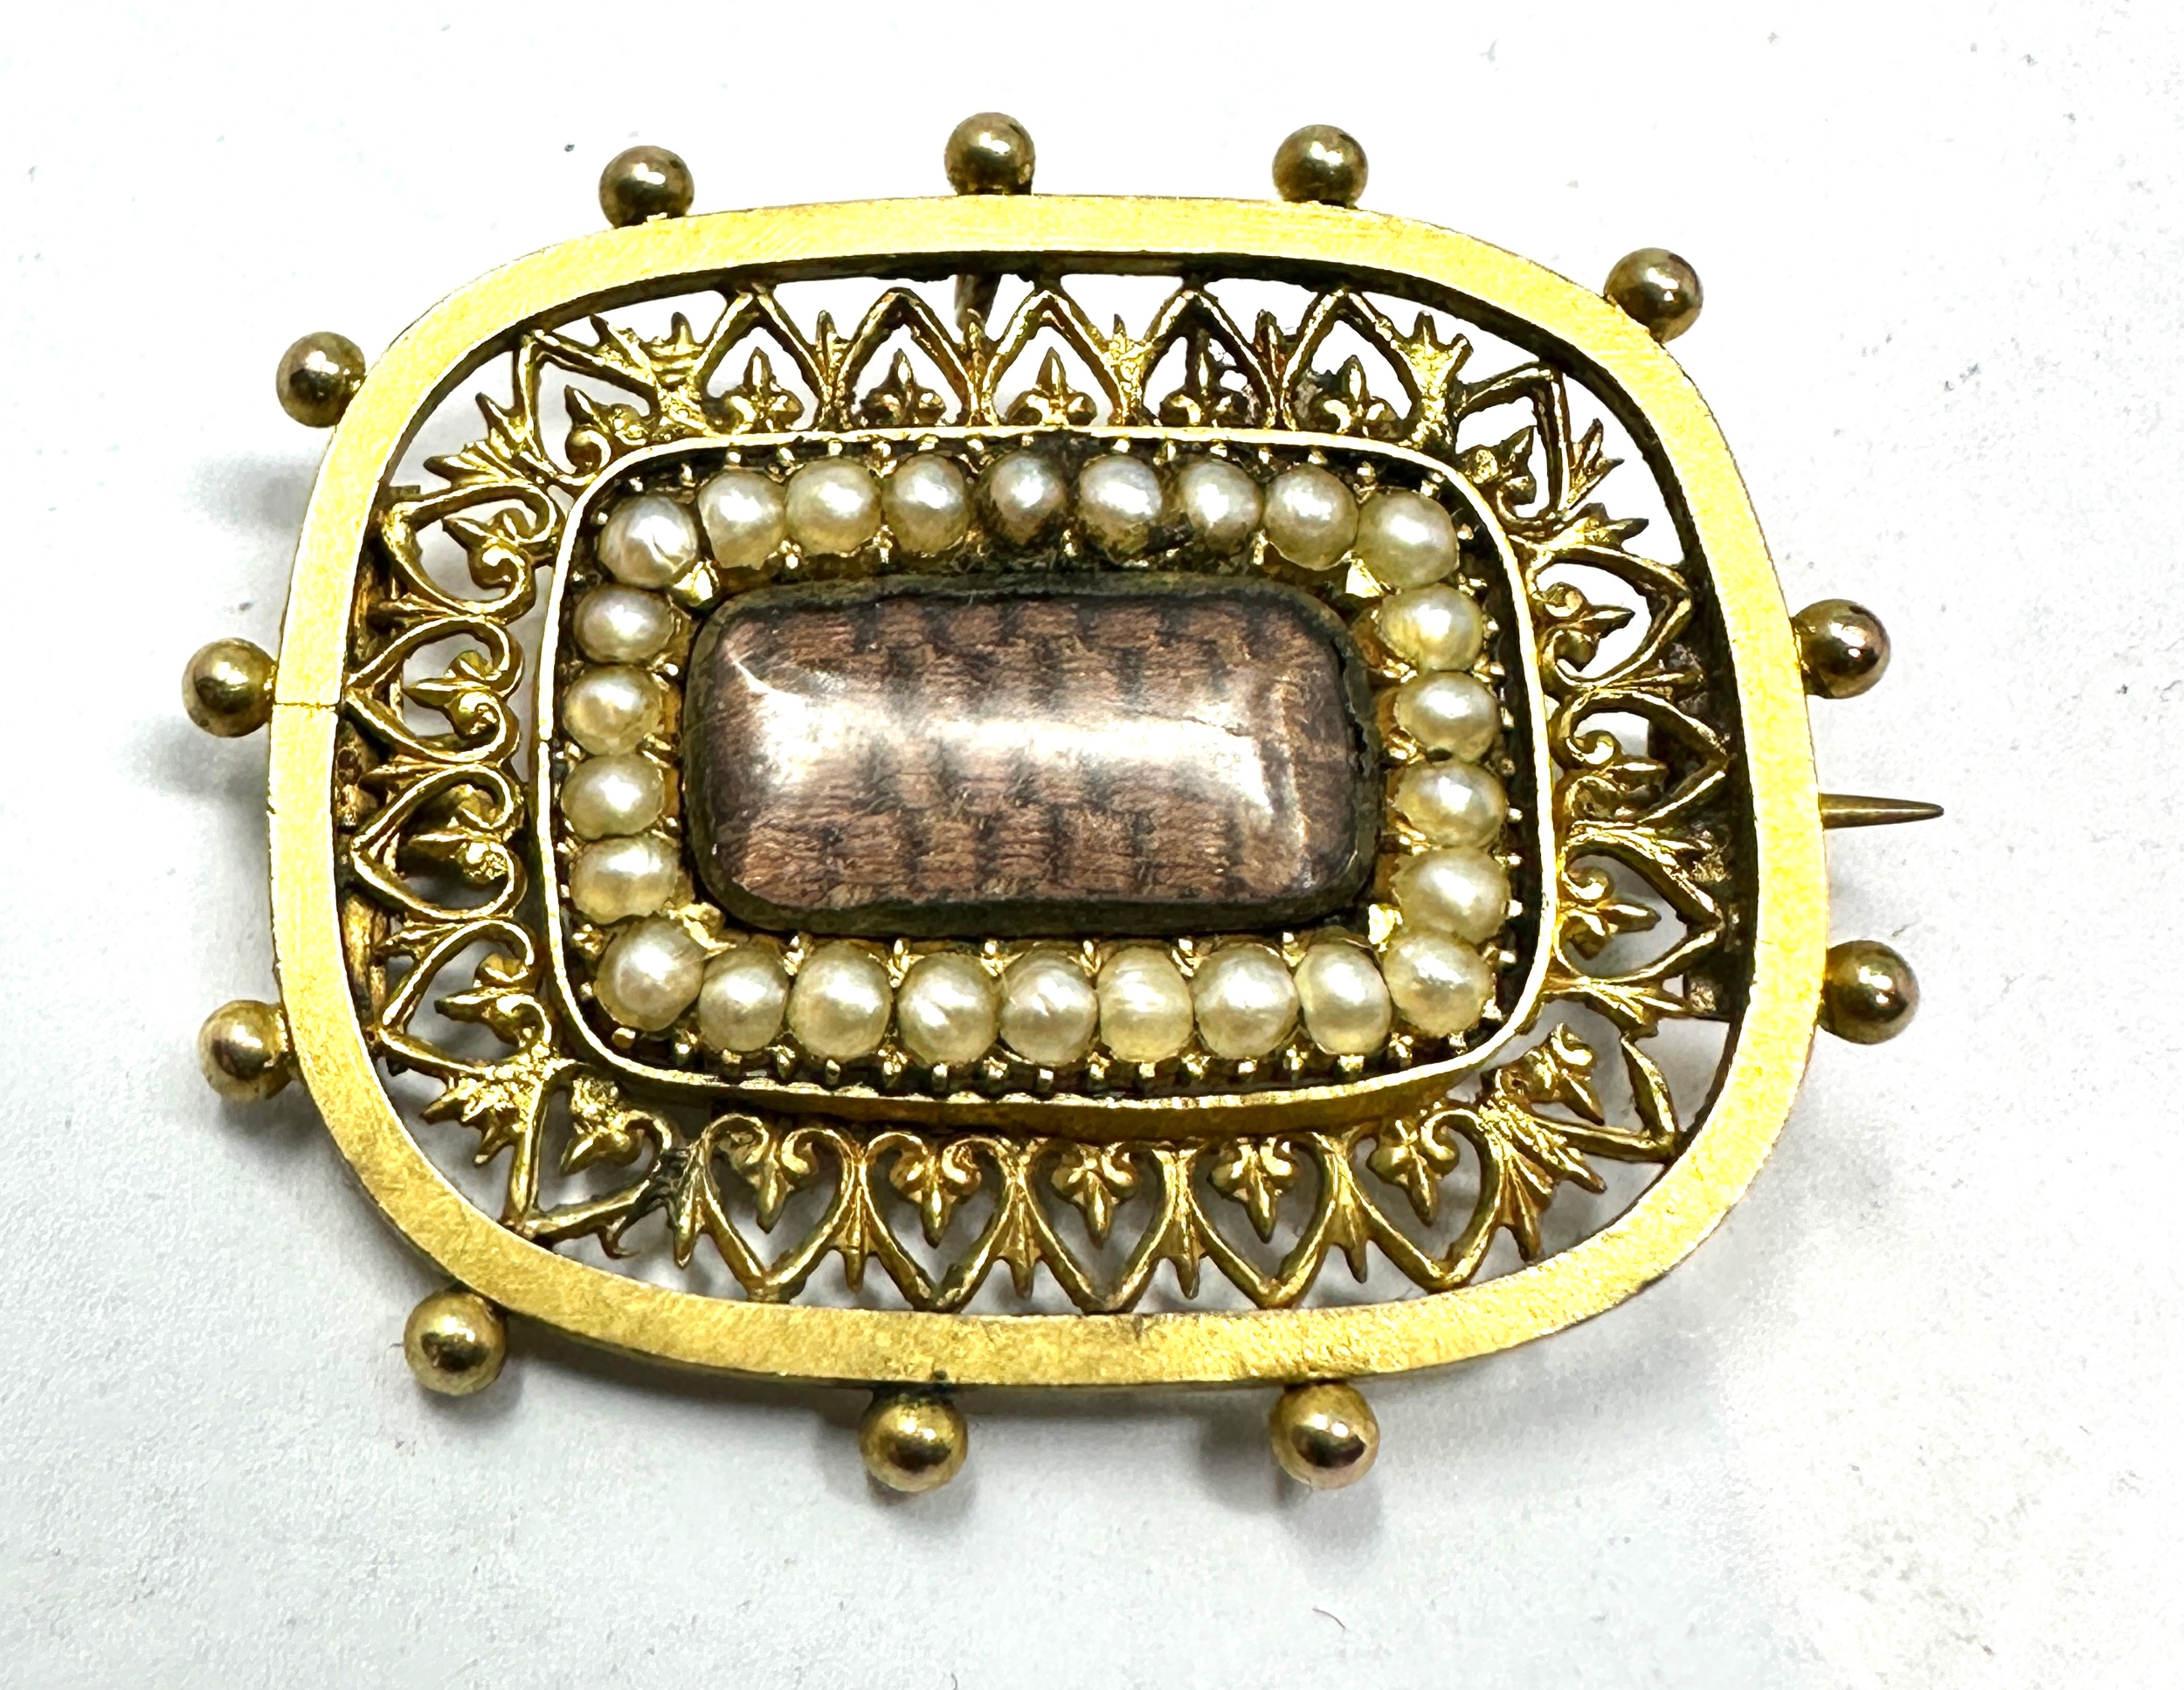 Antique 15ct gold mourning brooch measures approx 3cm by 2.3cm xrt tested as 15ct gold weight 4.4g